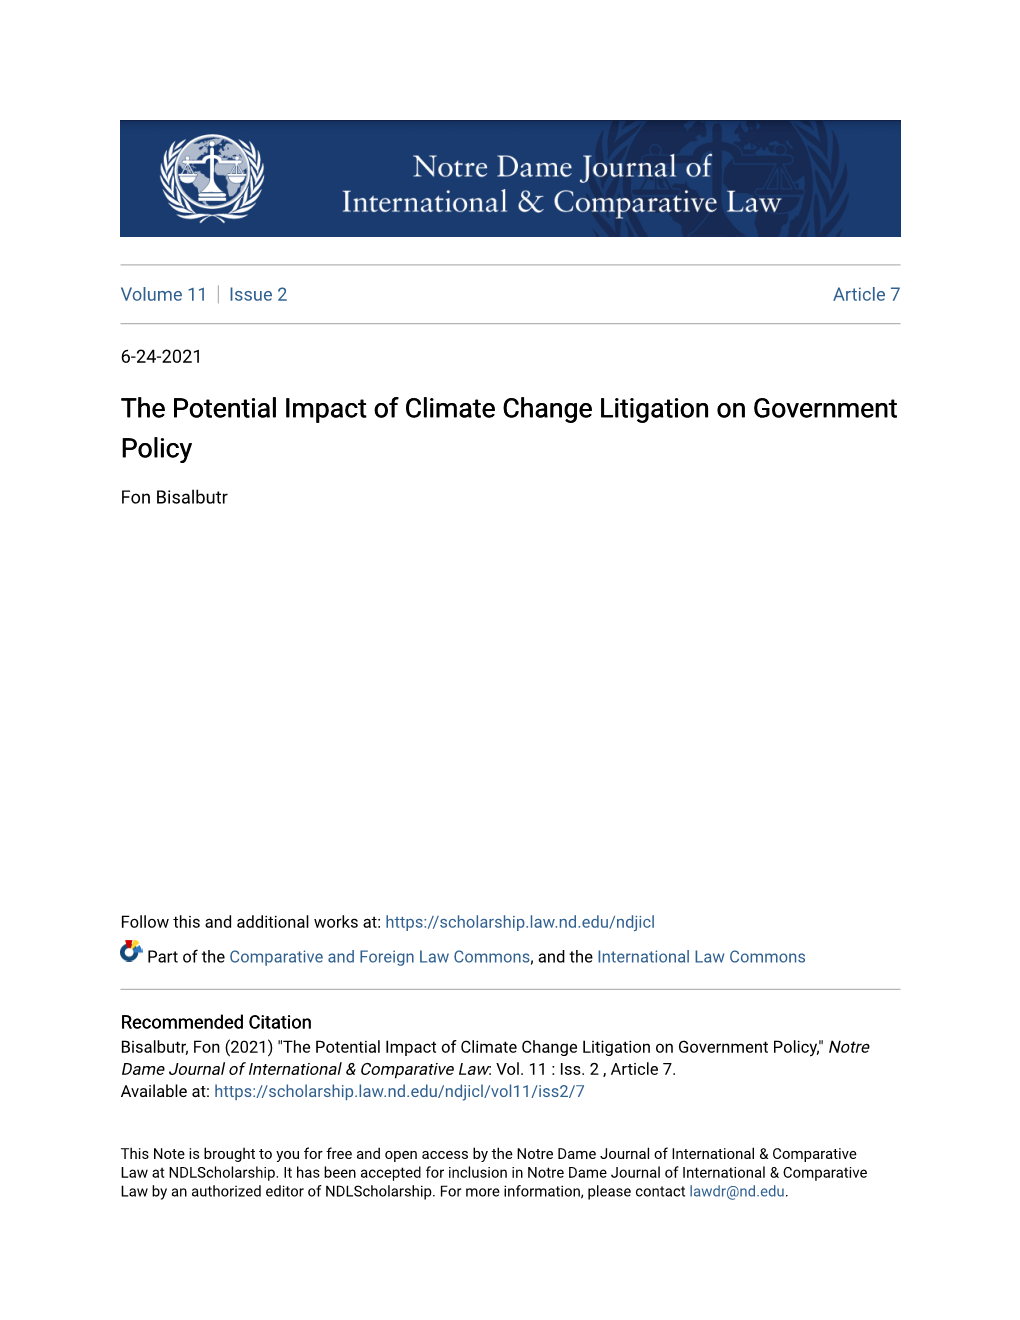 The Potential Impact of Climate Change Litigation on Government Policy